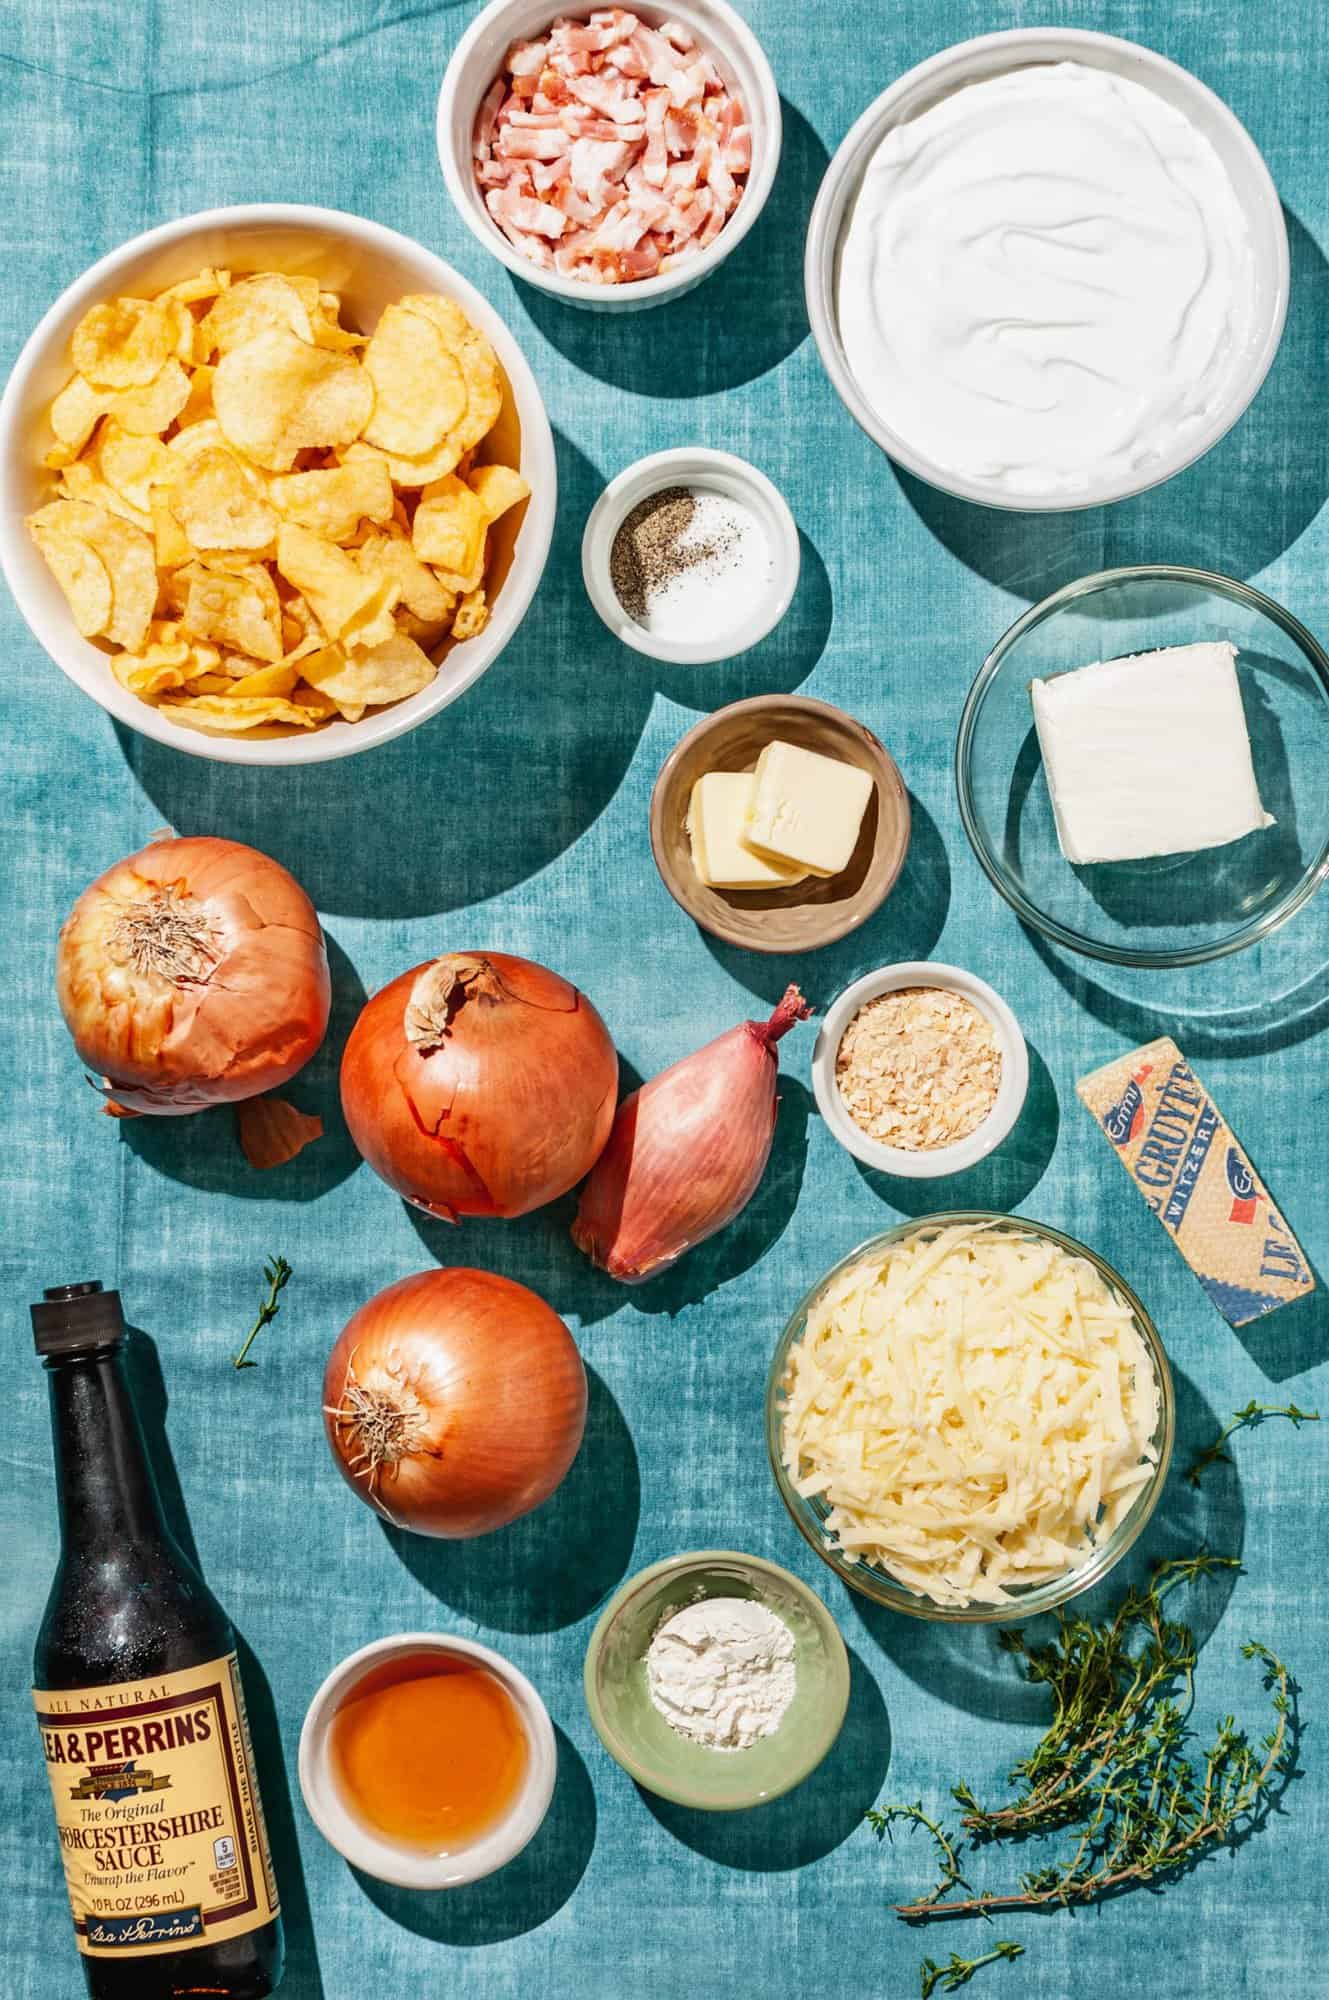 ingredients to make baked caramelized onion dip with gruyere